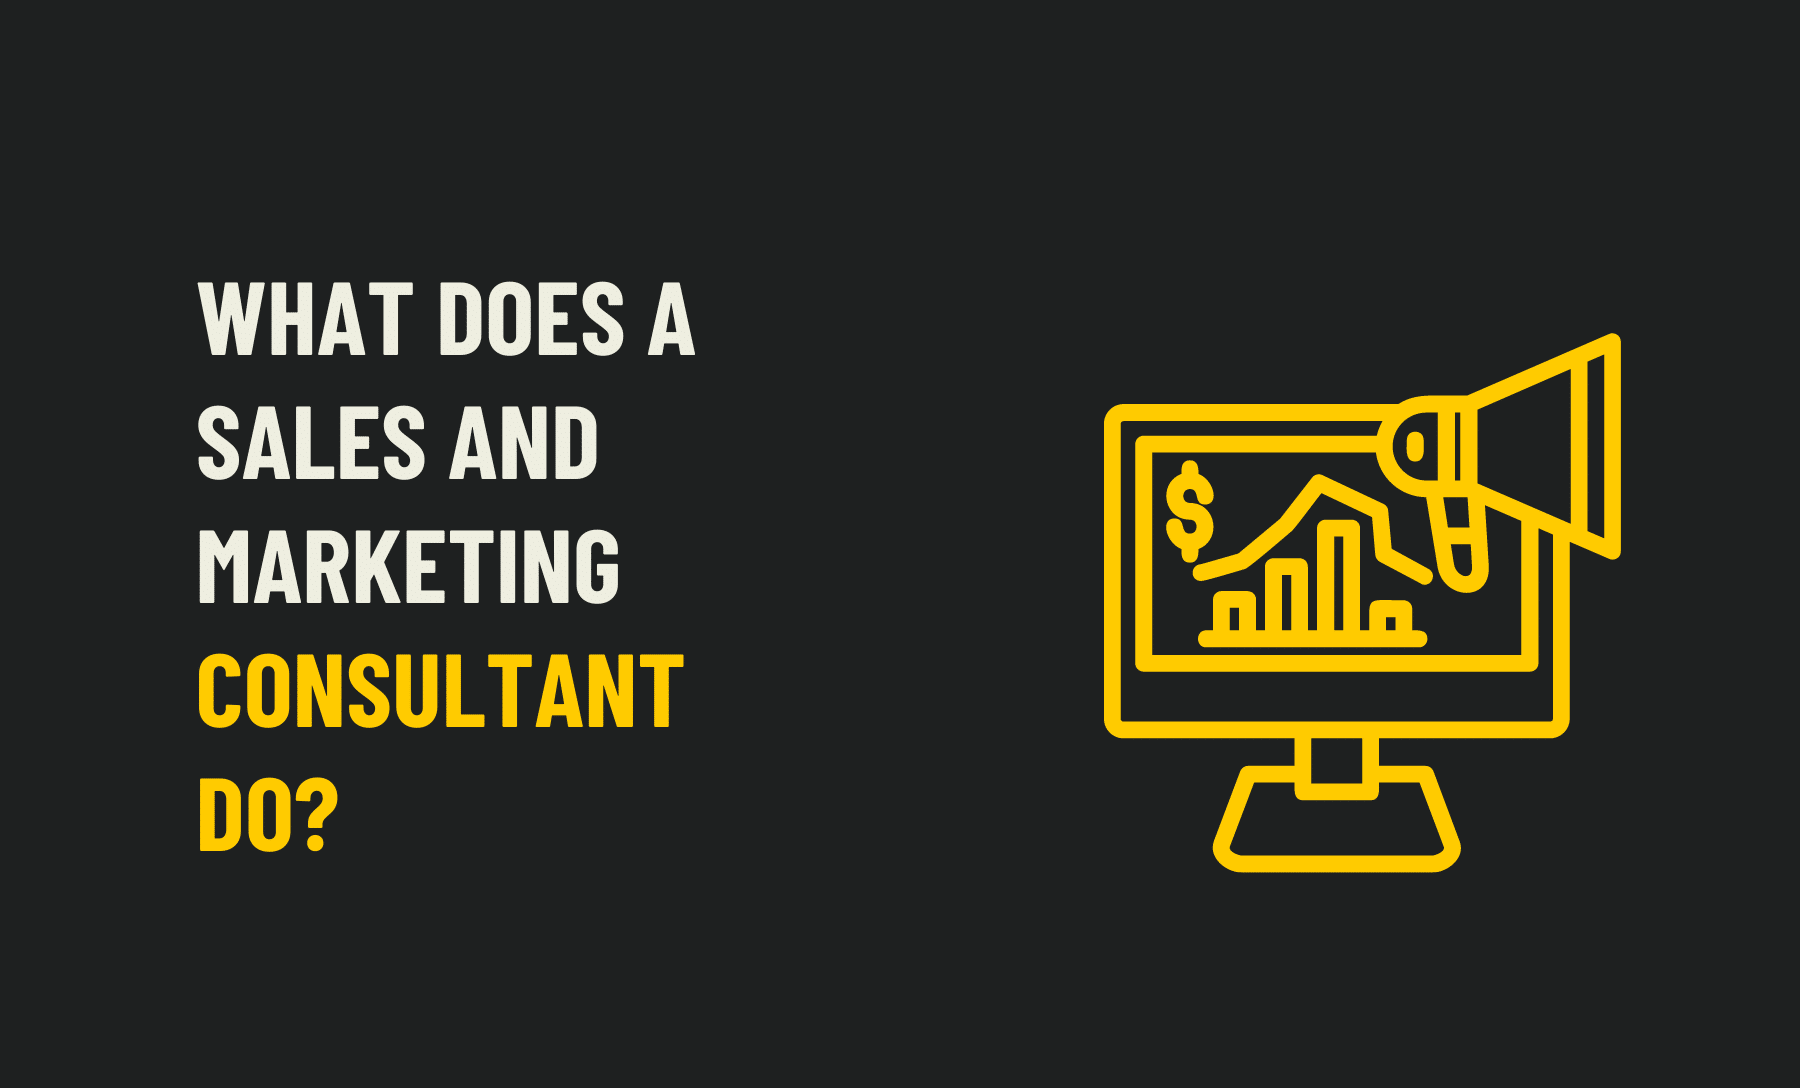 What Does A Sales And Marketing Consultant Do?